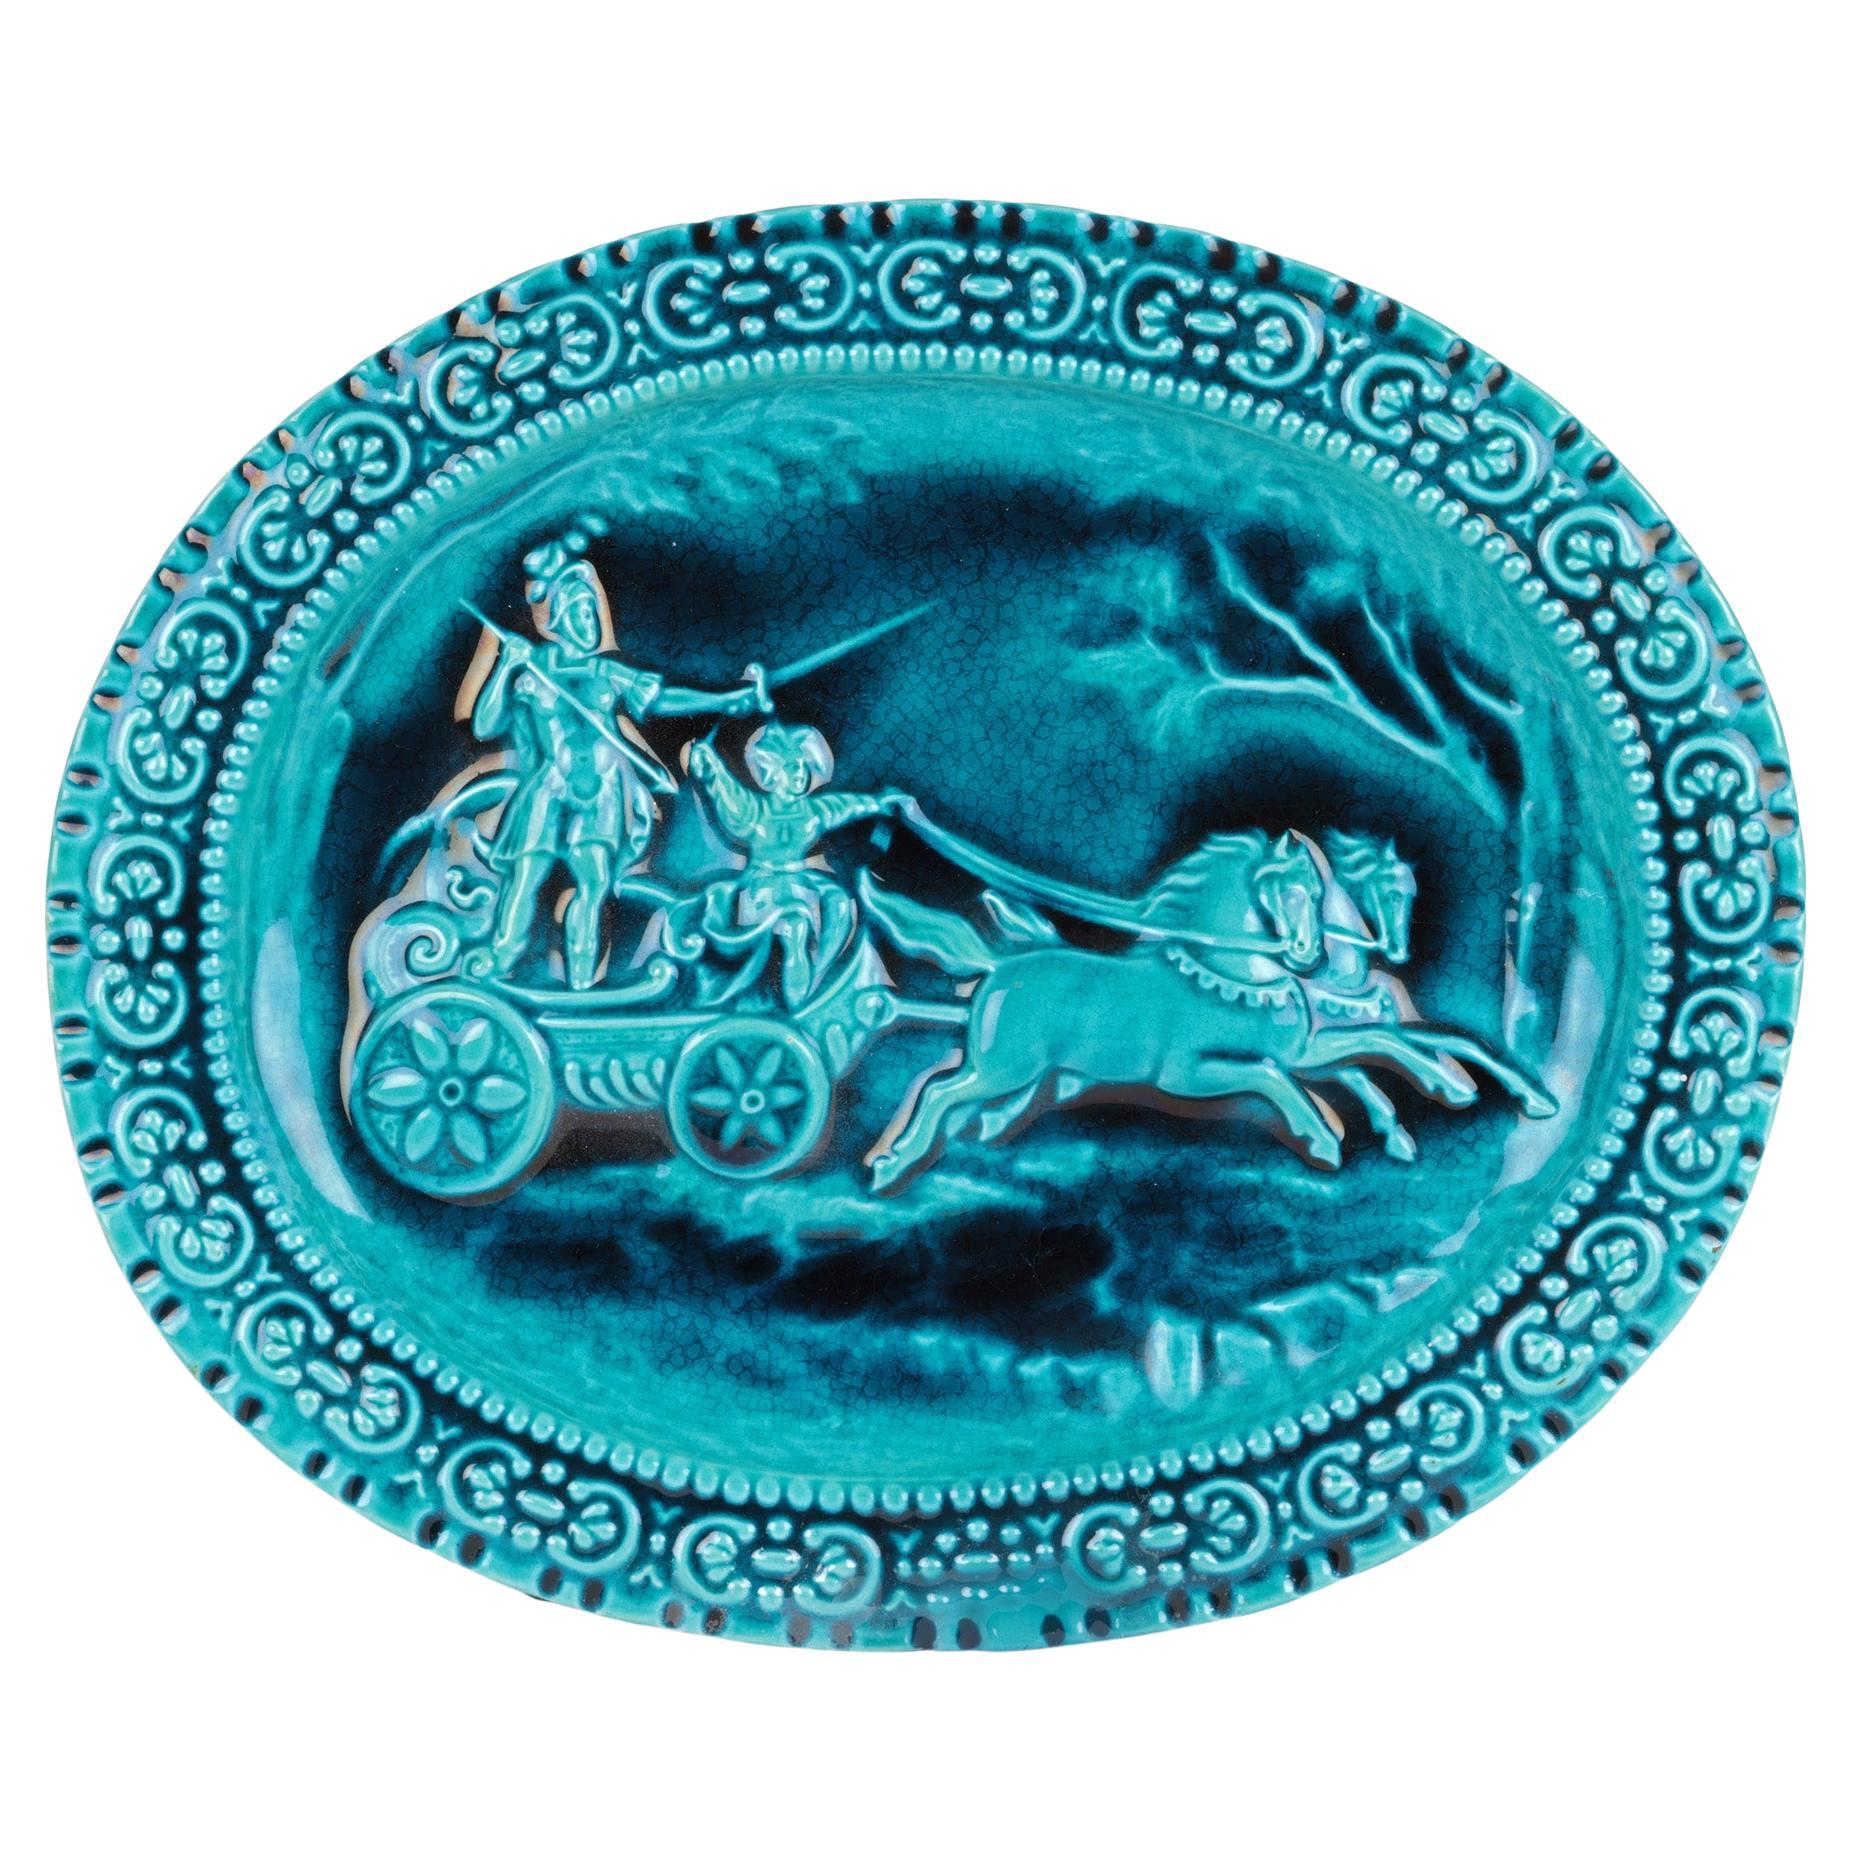 Maw & Co Walter Crane Majolica Chariot Art Pottery Plaque For Sale